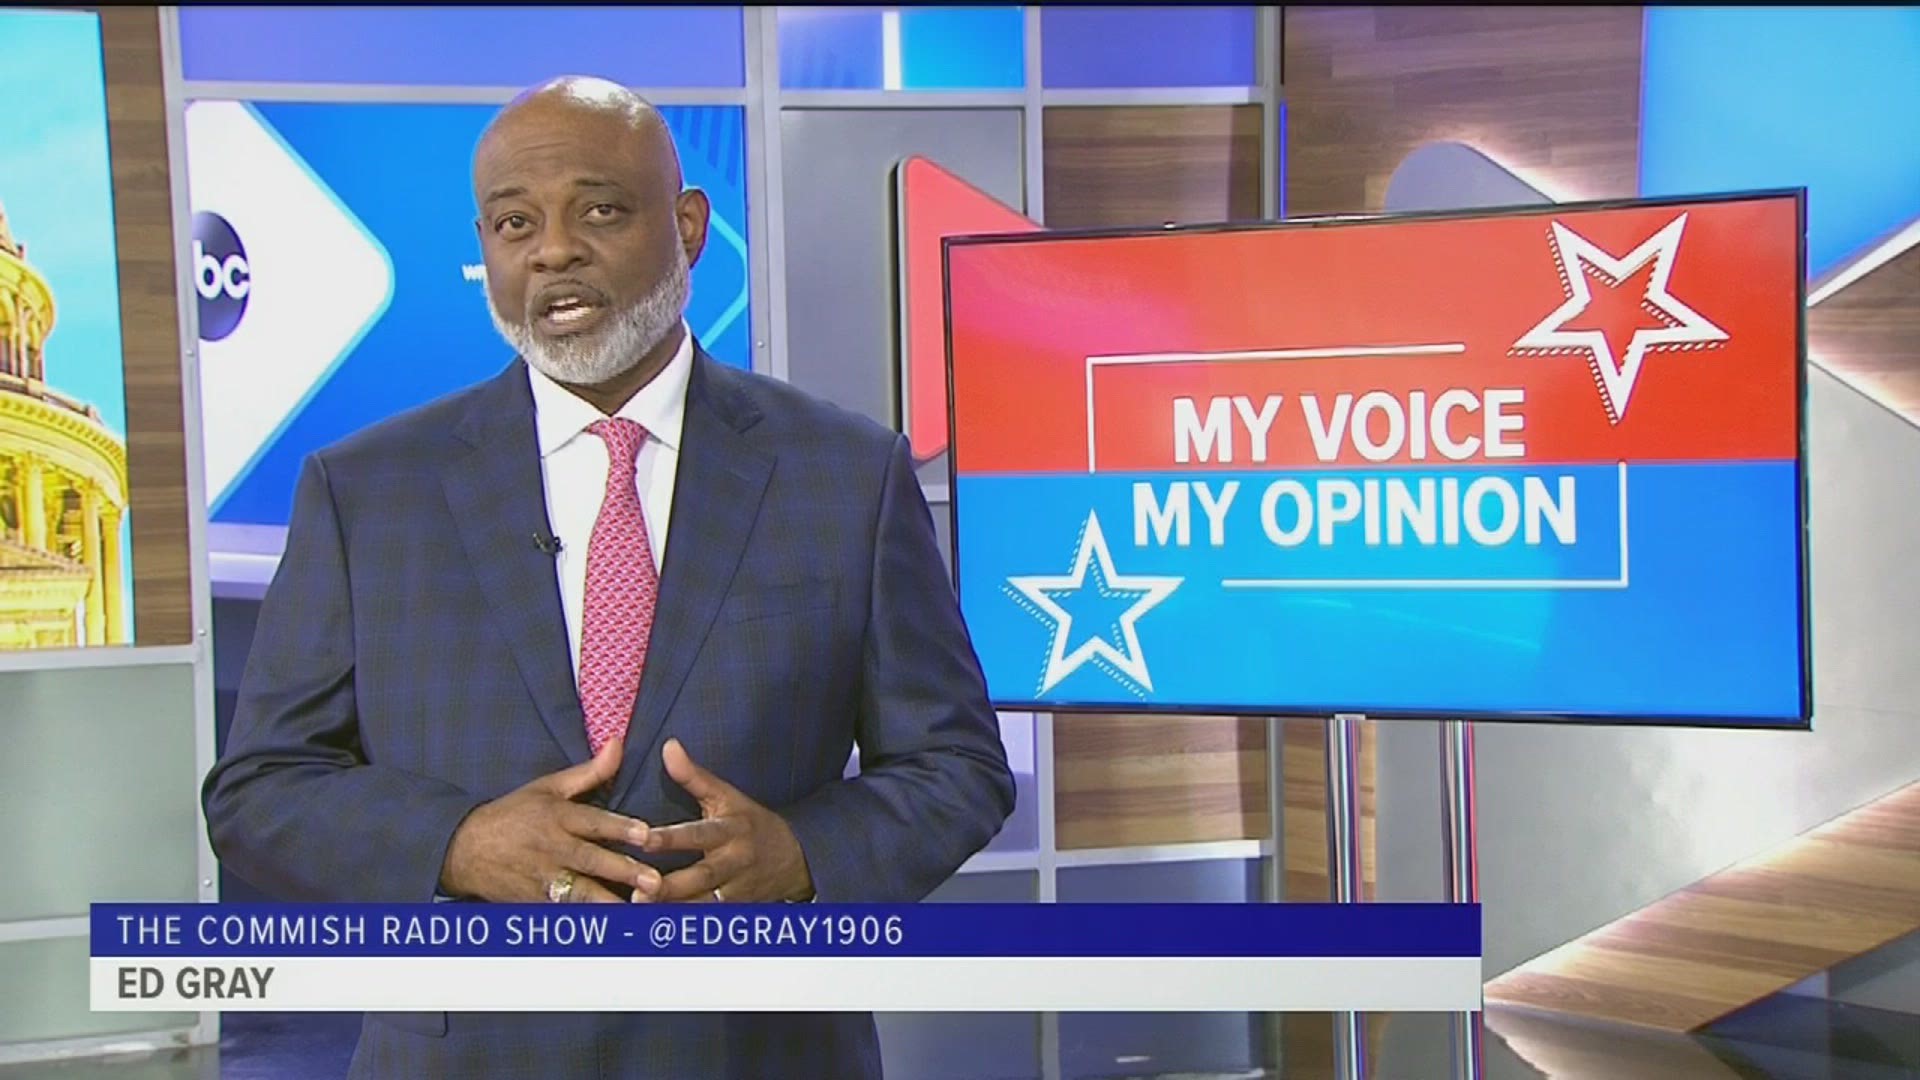 Injustice is sometimes the seed for political change. And in Dallas, it might also be driving people to the polls on June 8 for the mayoral runoff. Ed Gray from the Commish Radio Show explains why with this week’s My Voice, My Opinion.